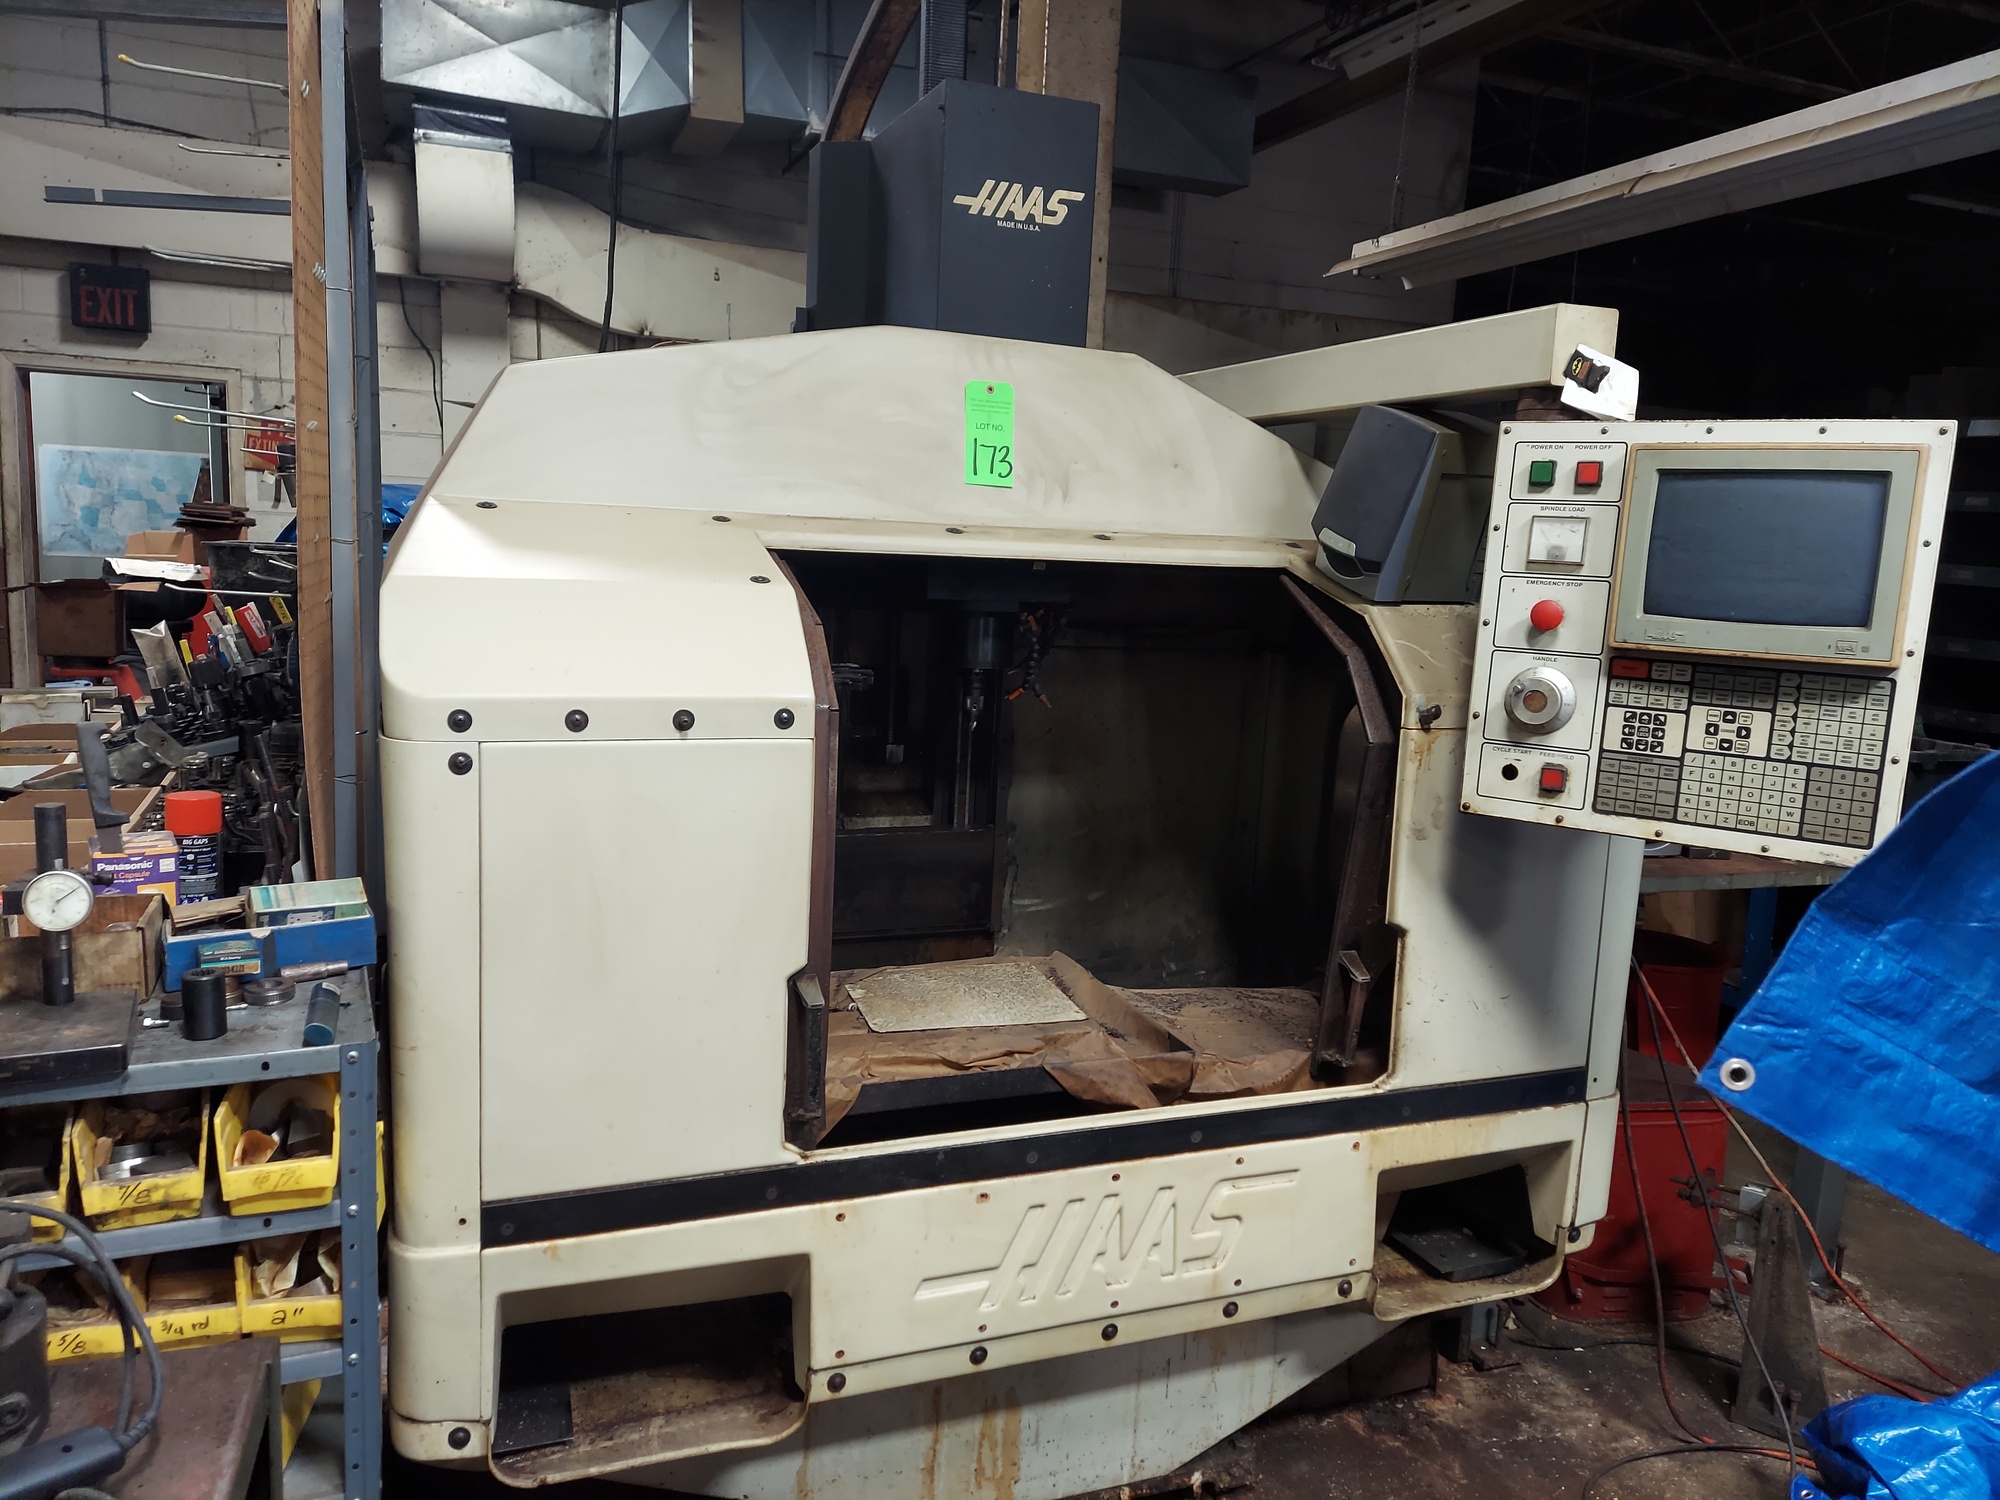 1989 HAAS VF-1 Vertical Machining Centers | Levy Recovery Group